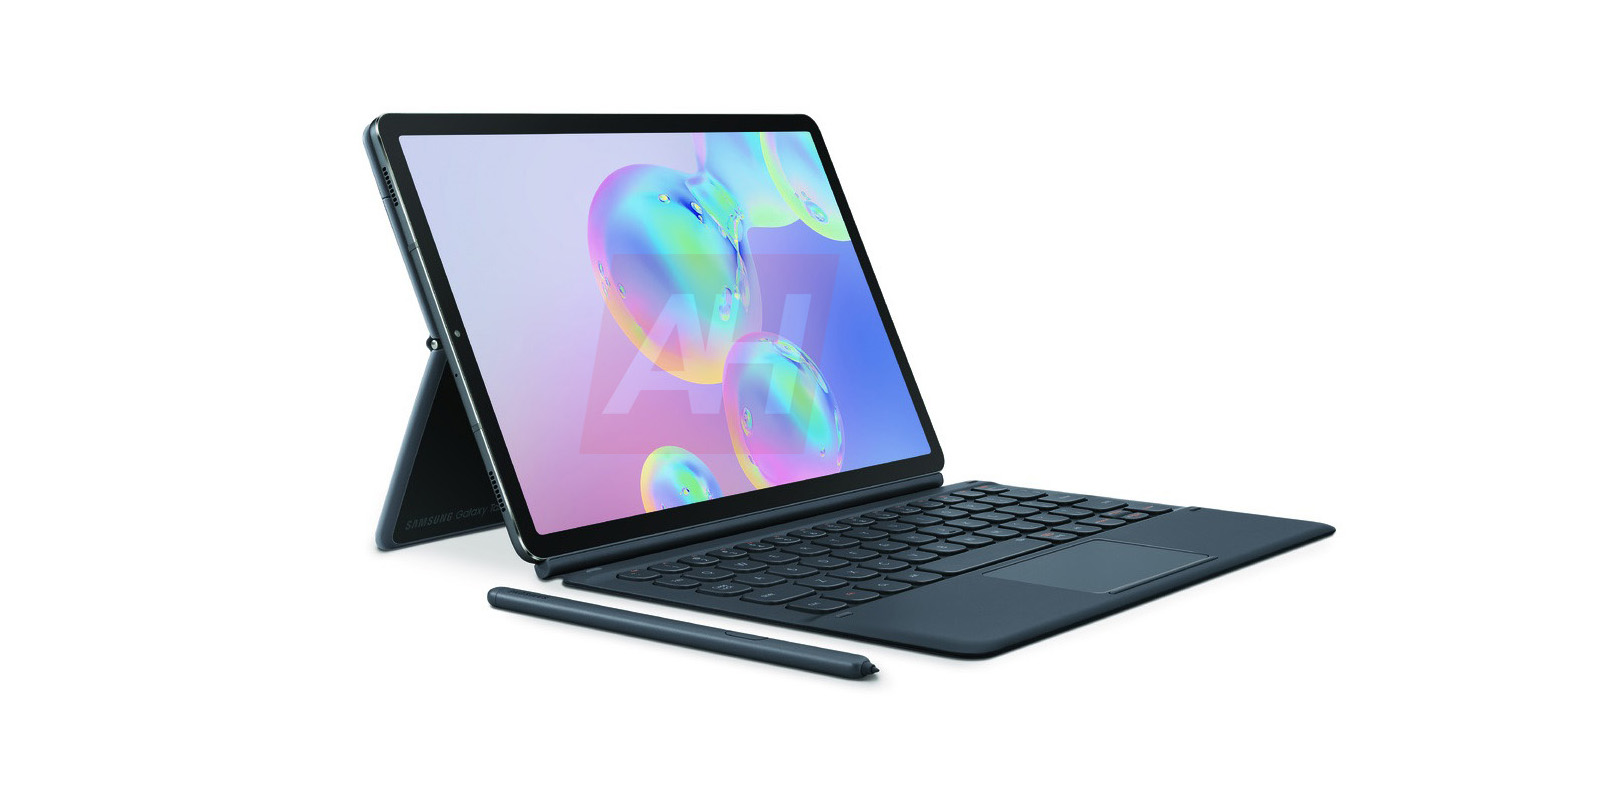 itálico Lima frotis Galaxy Tab S6 renders leak w/ official keyboard - 9to5Google